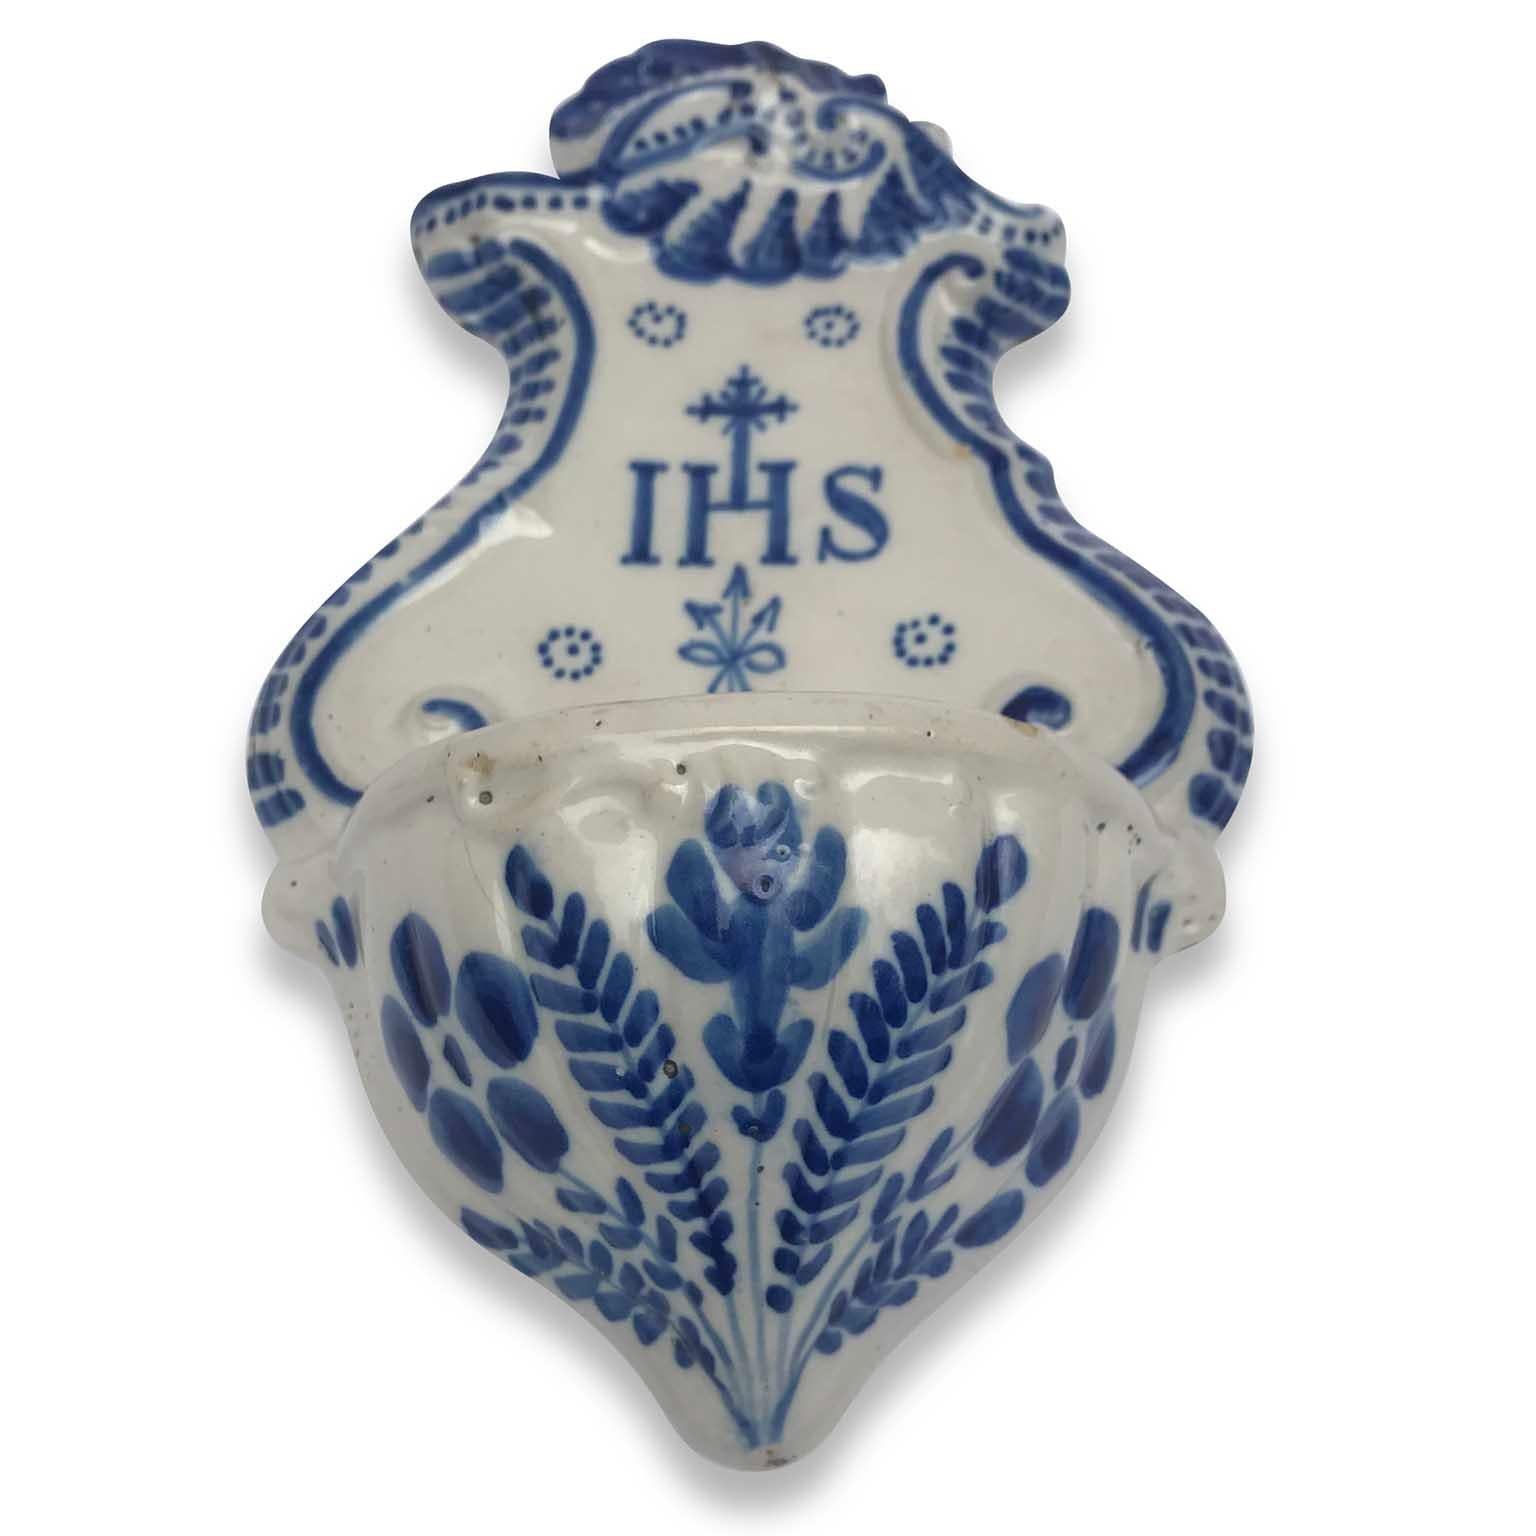 Antique shaped Holy Water font from Italy, a white and blue ceramic artwork dating back to early 19th century. 
This lovely religious work is decorated with blue vegetal and floral motifs on the font, the IHS central inscription and a cross in the